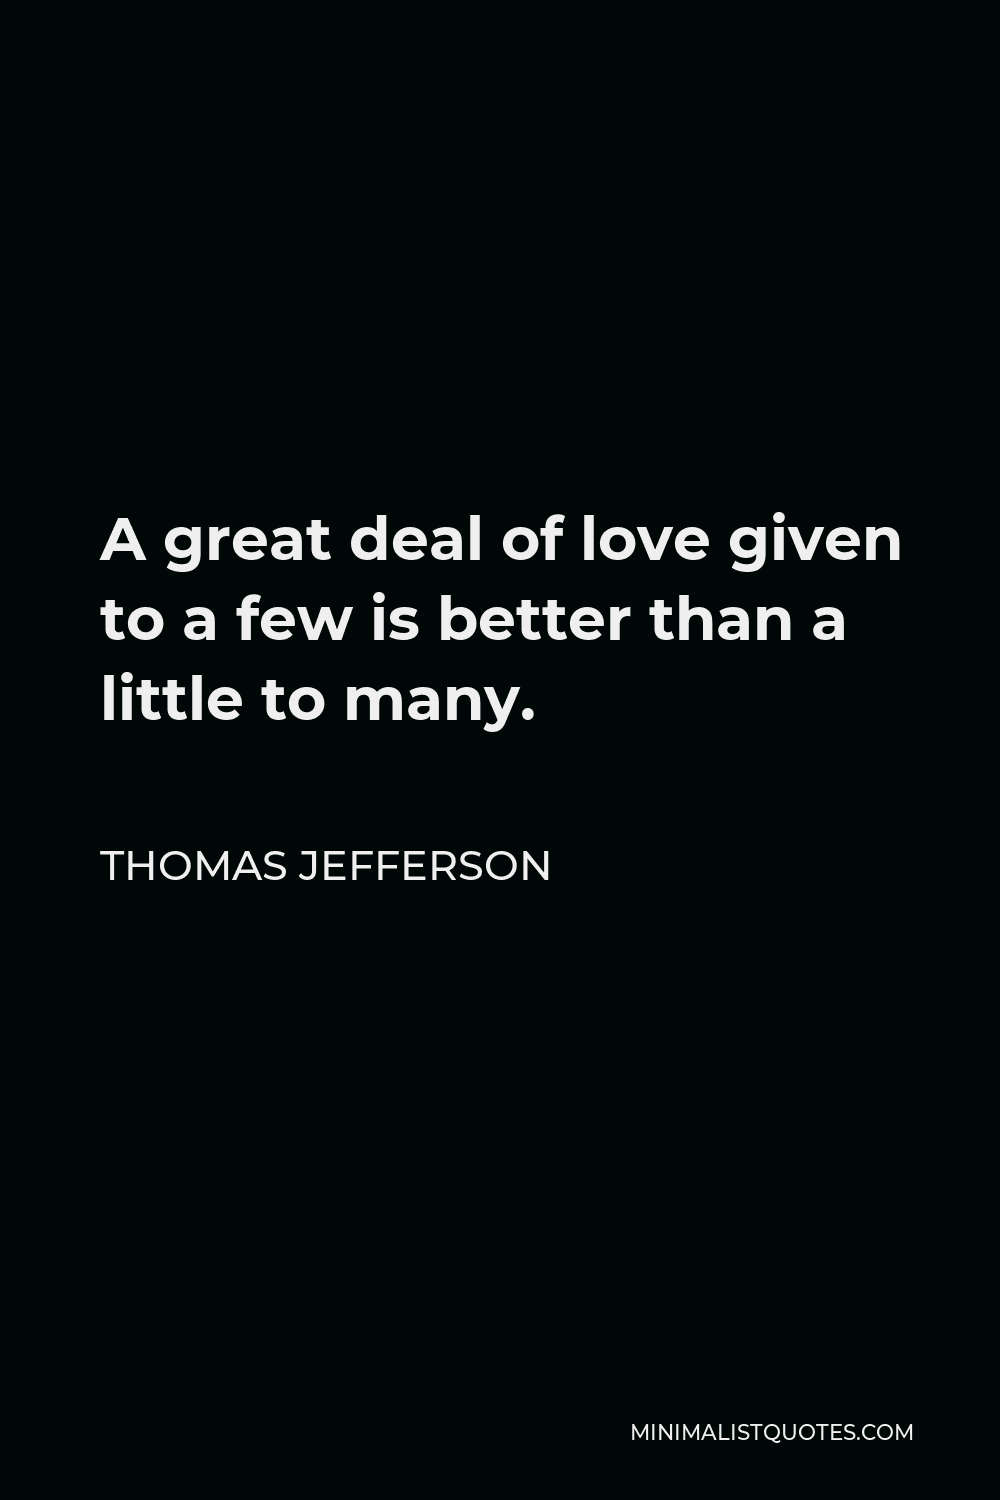 Thomas Jefferson Quote - A great deal of love given to a few is better than a little to many.